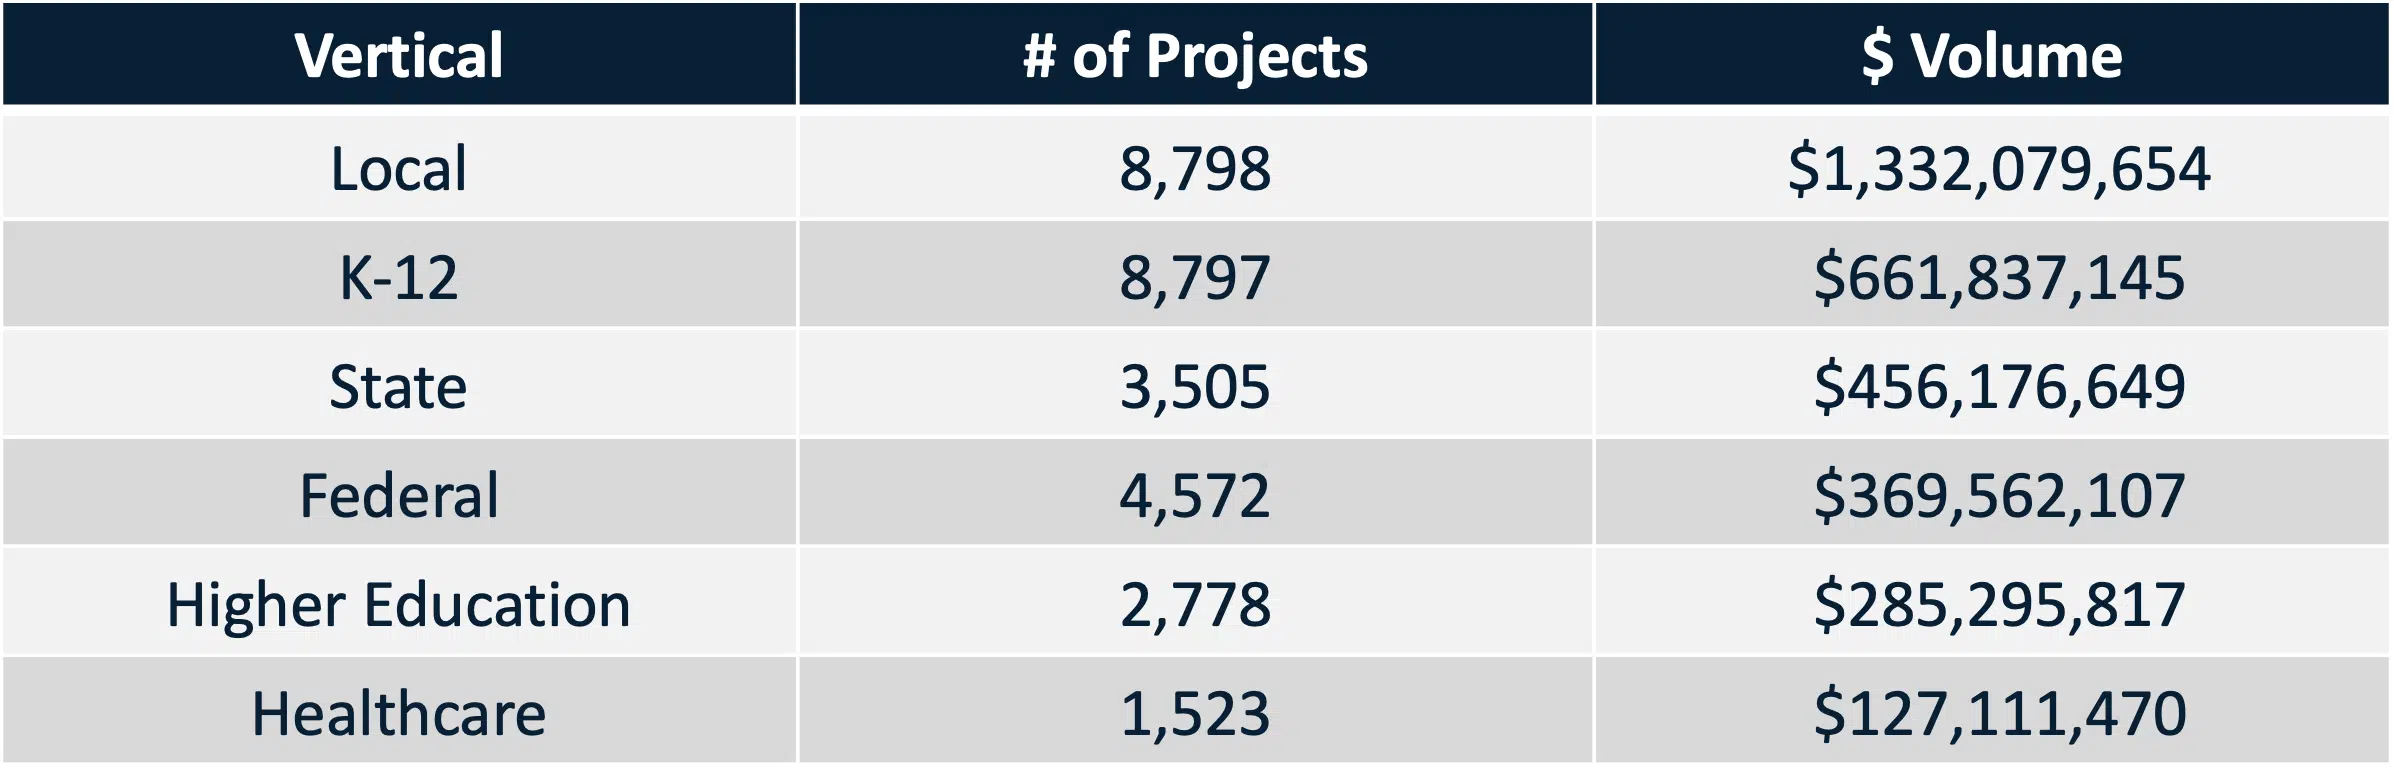 Project Volume by Industry Chart